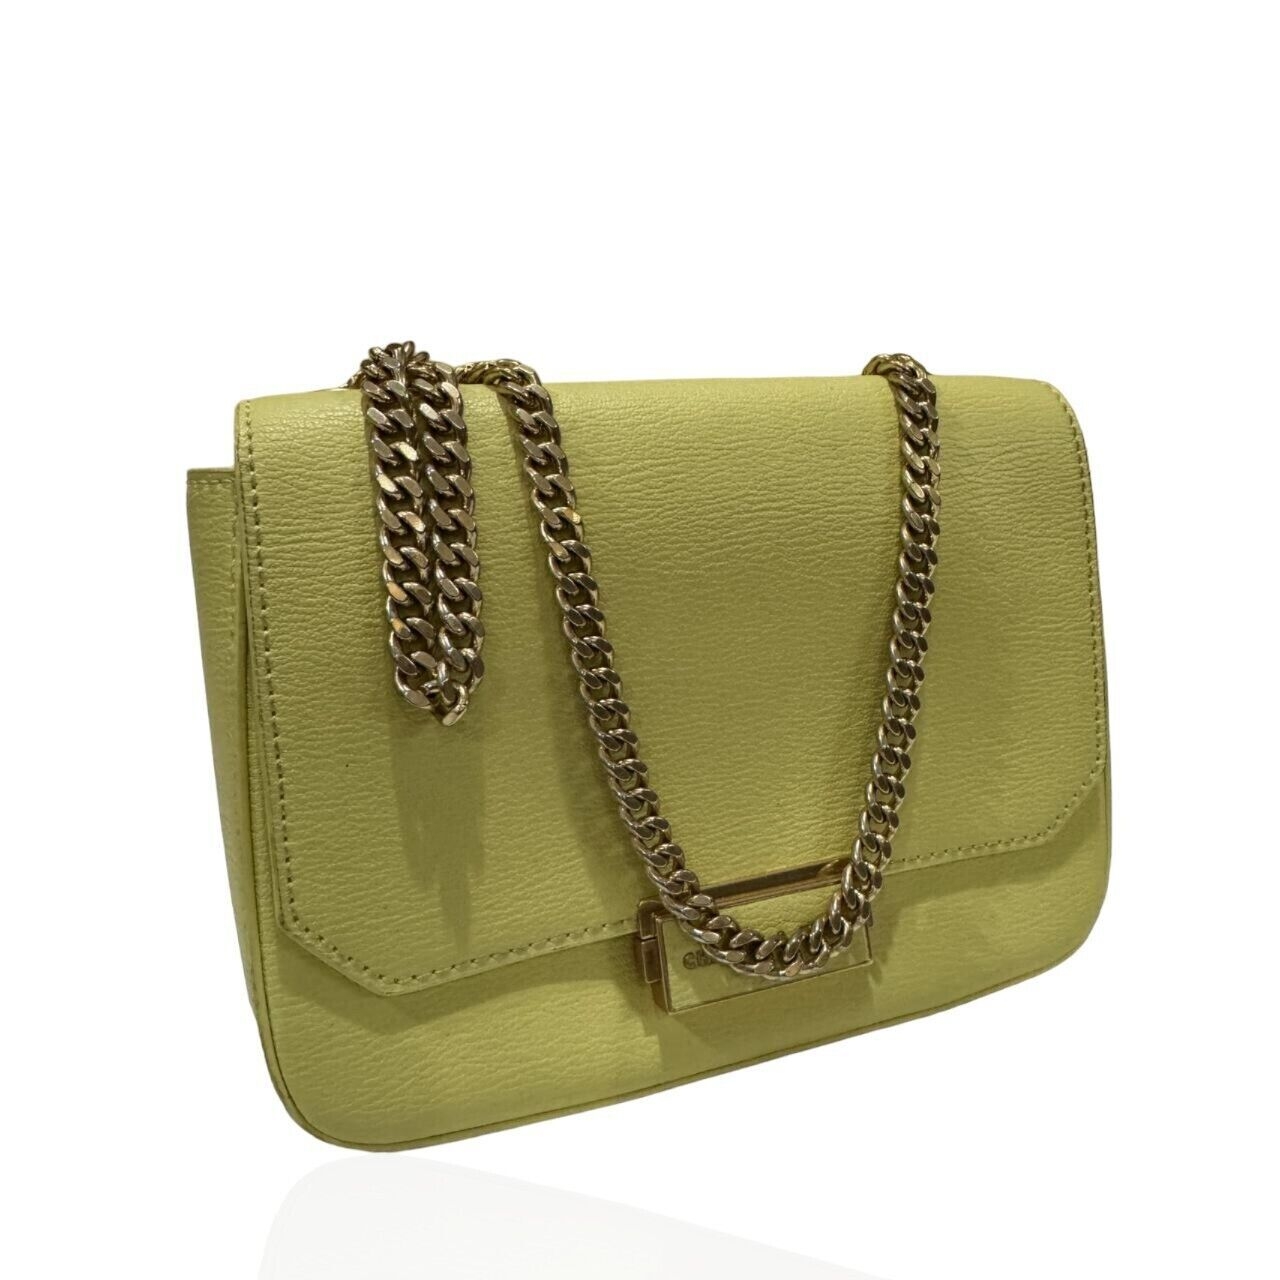 Charles & Keith Chain Strap Shoulder Bag - Butter